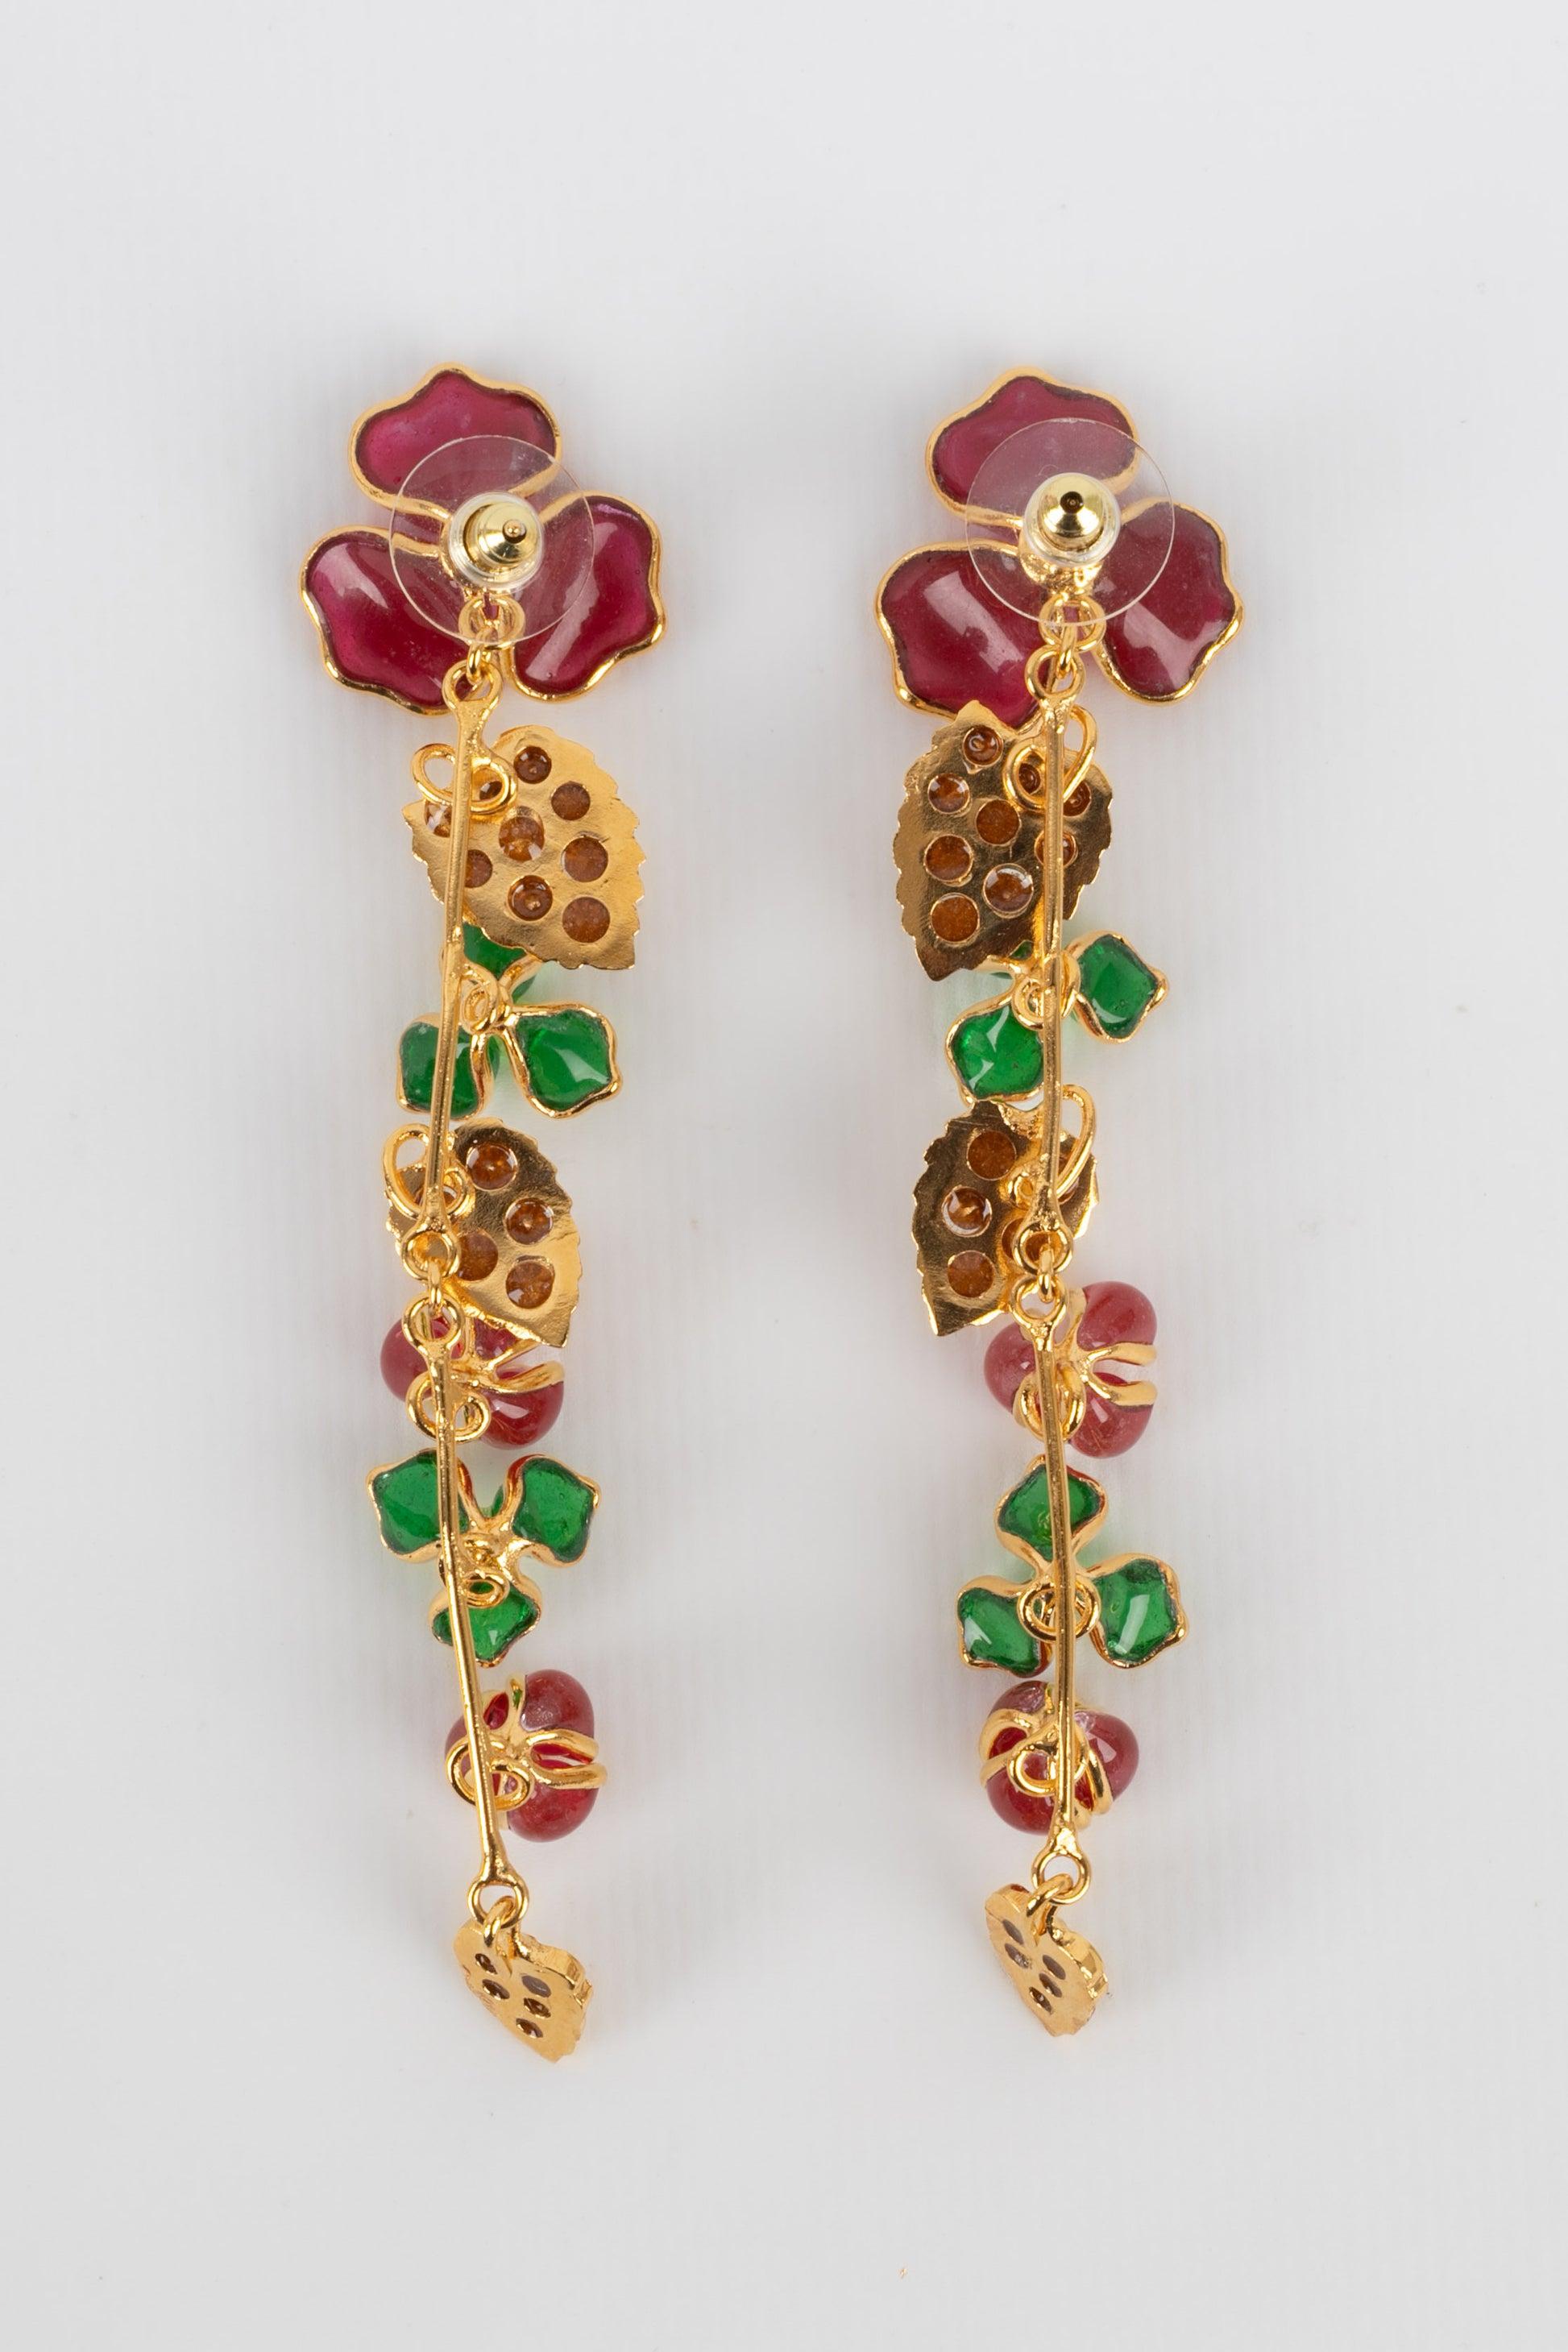 Augustine - Golden metal earrings with rhinestones and glass paste in pink and green tones.

Additional information:
Condition: Very good condition
Dimensions: Length: 11 cm

Seller Reference: BO320